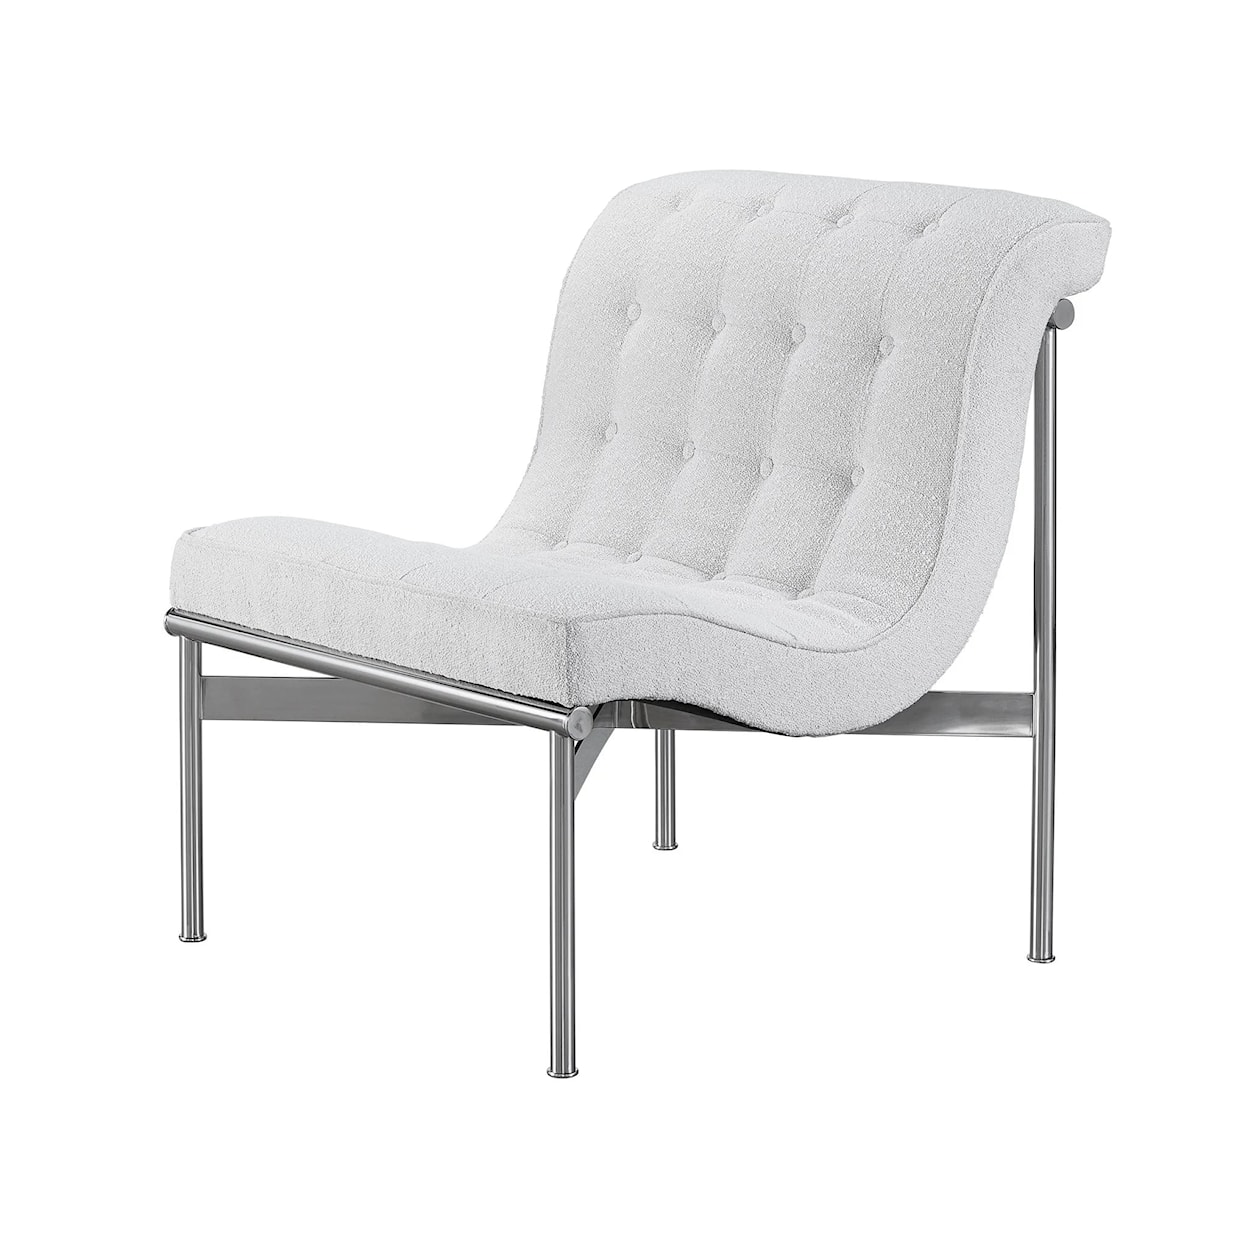 Universal Shannon Shannon Accent Chair